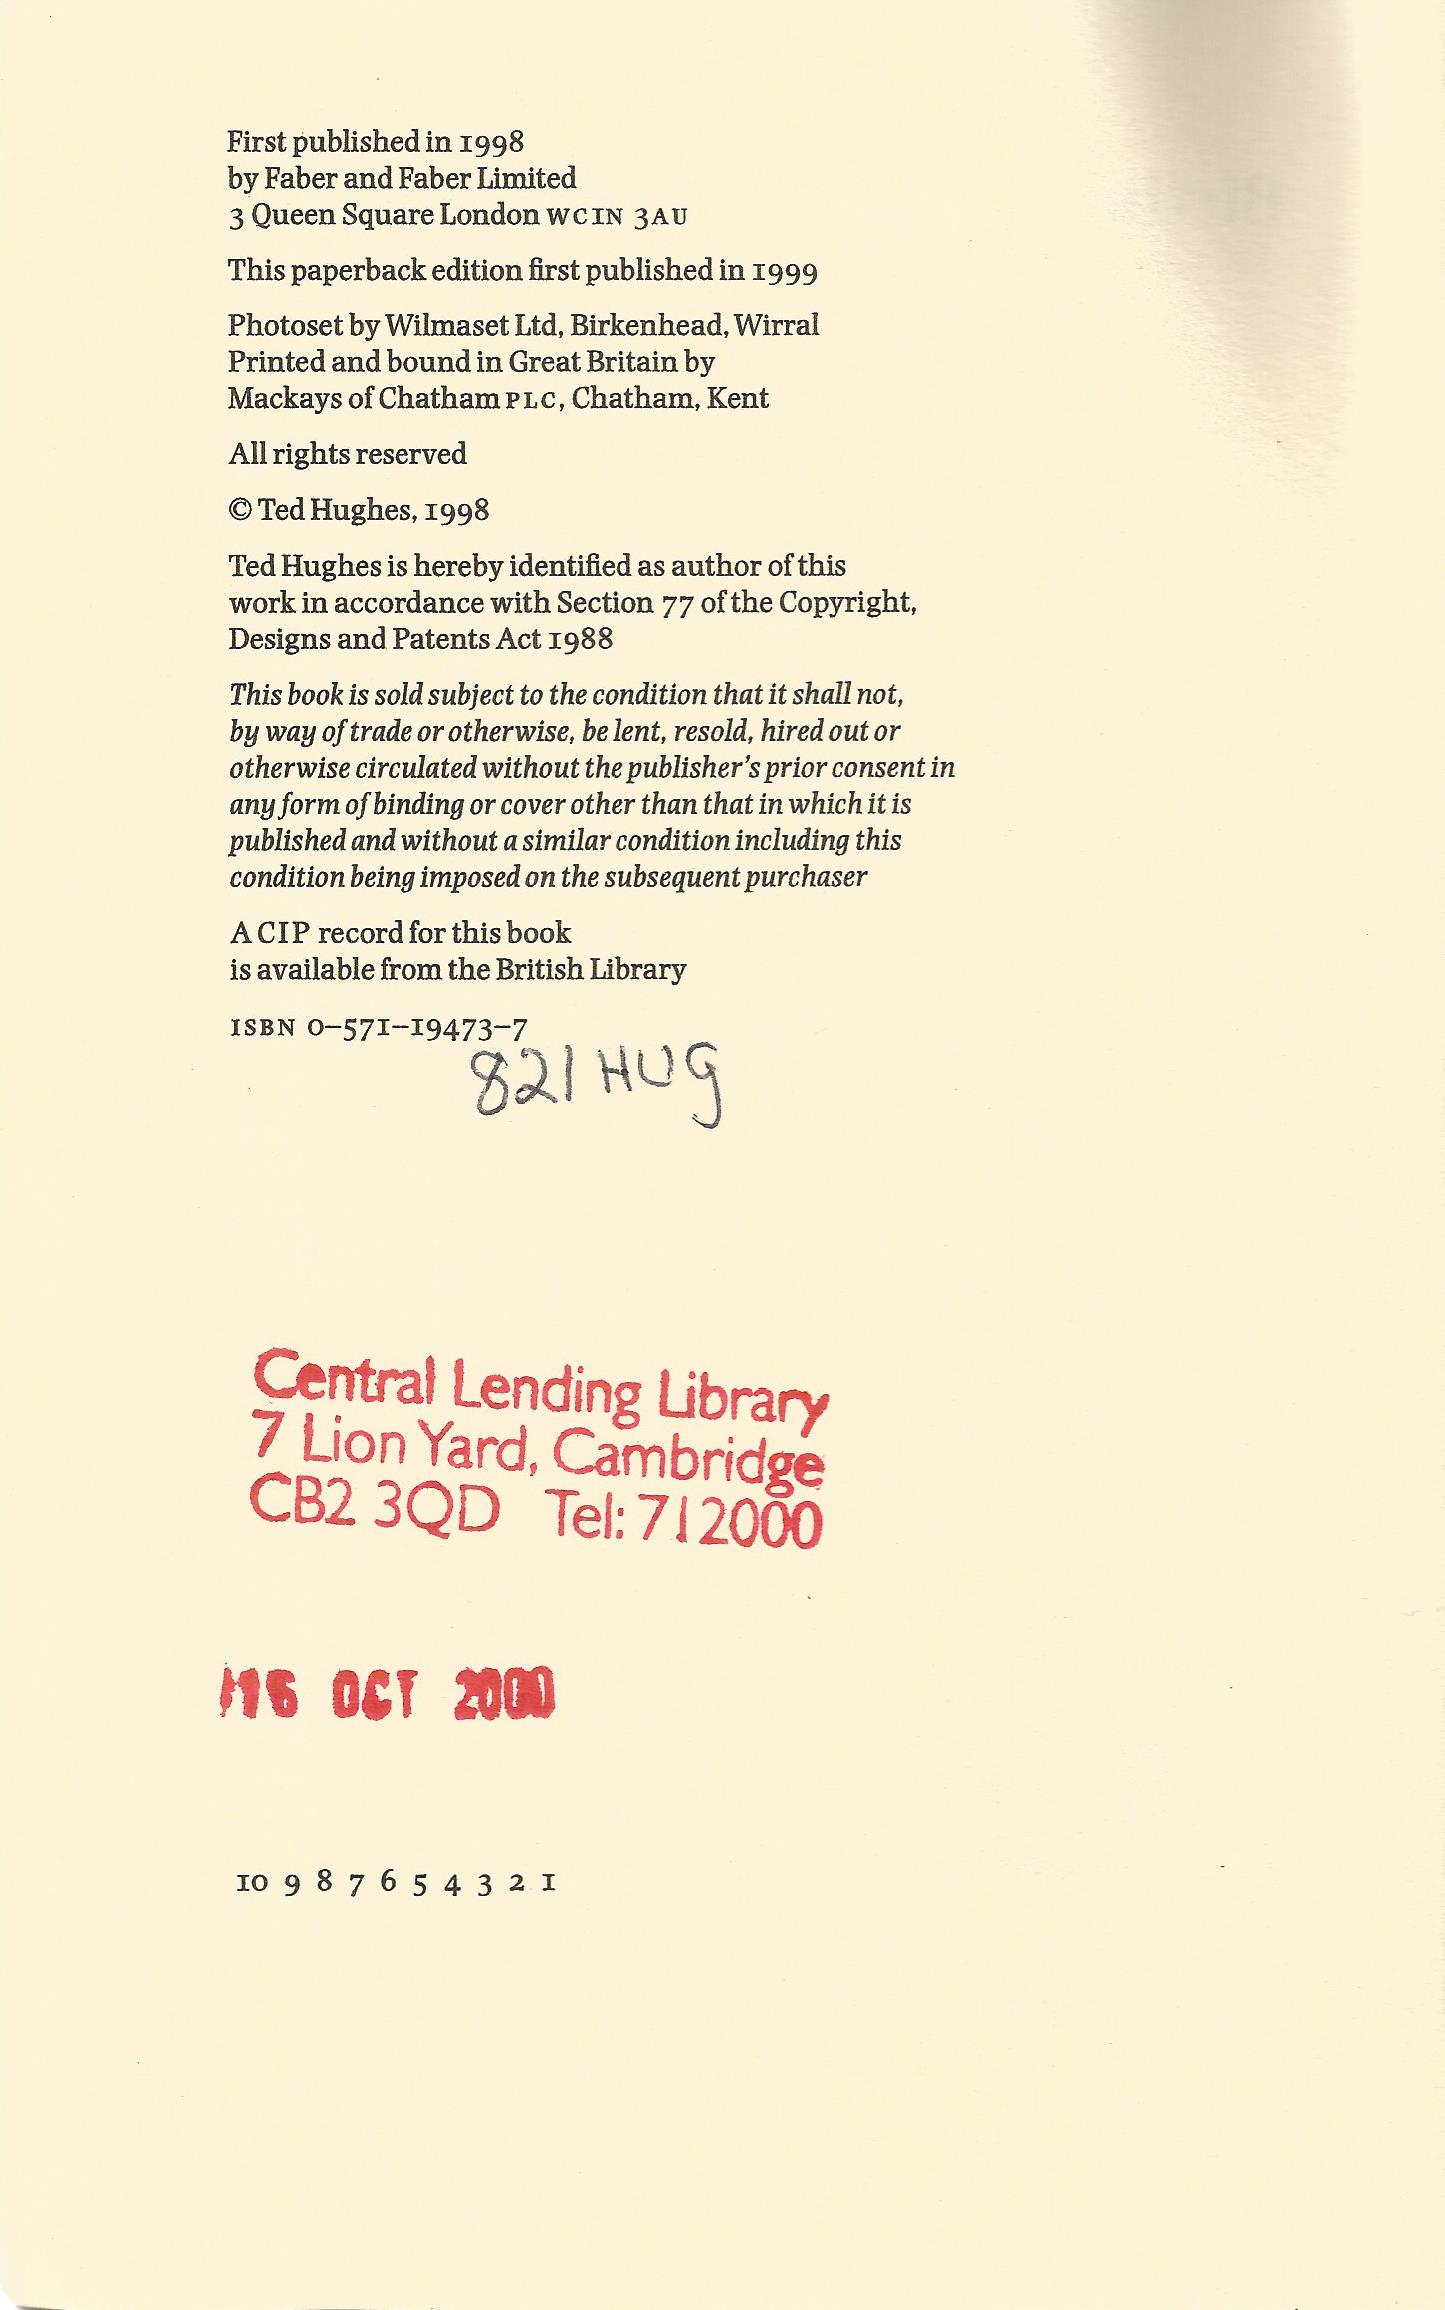 Birthday Letters by Ted Hughes Softback Book 1999 First Softback Edition published by Faber and - Image 3 of 3